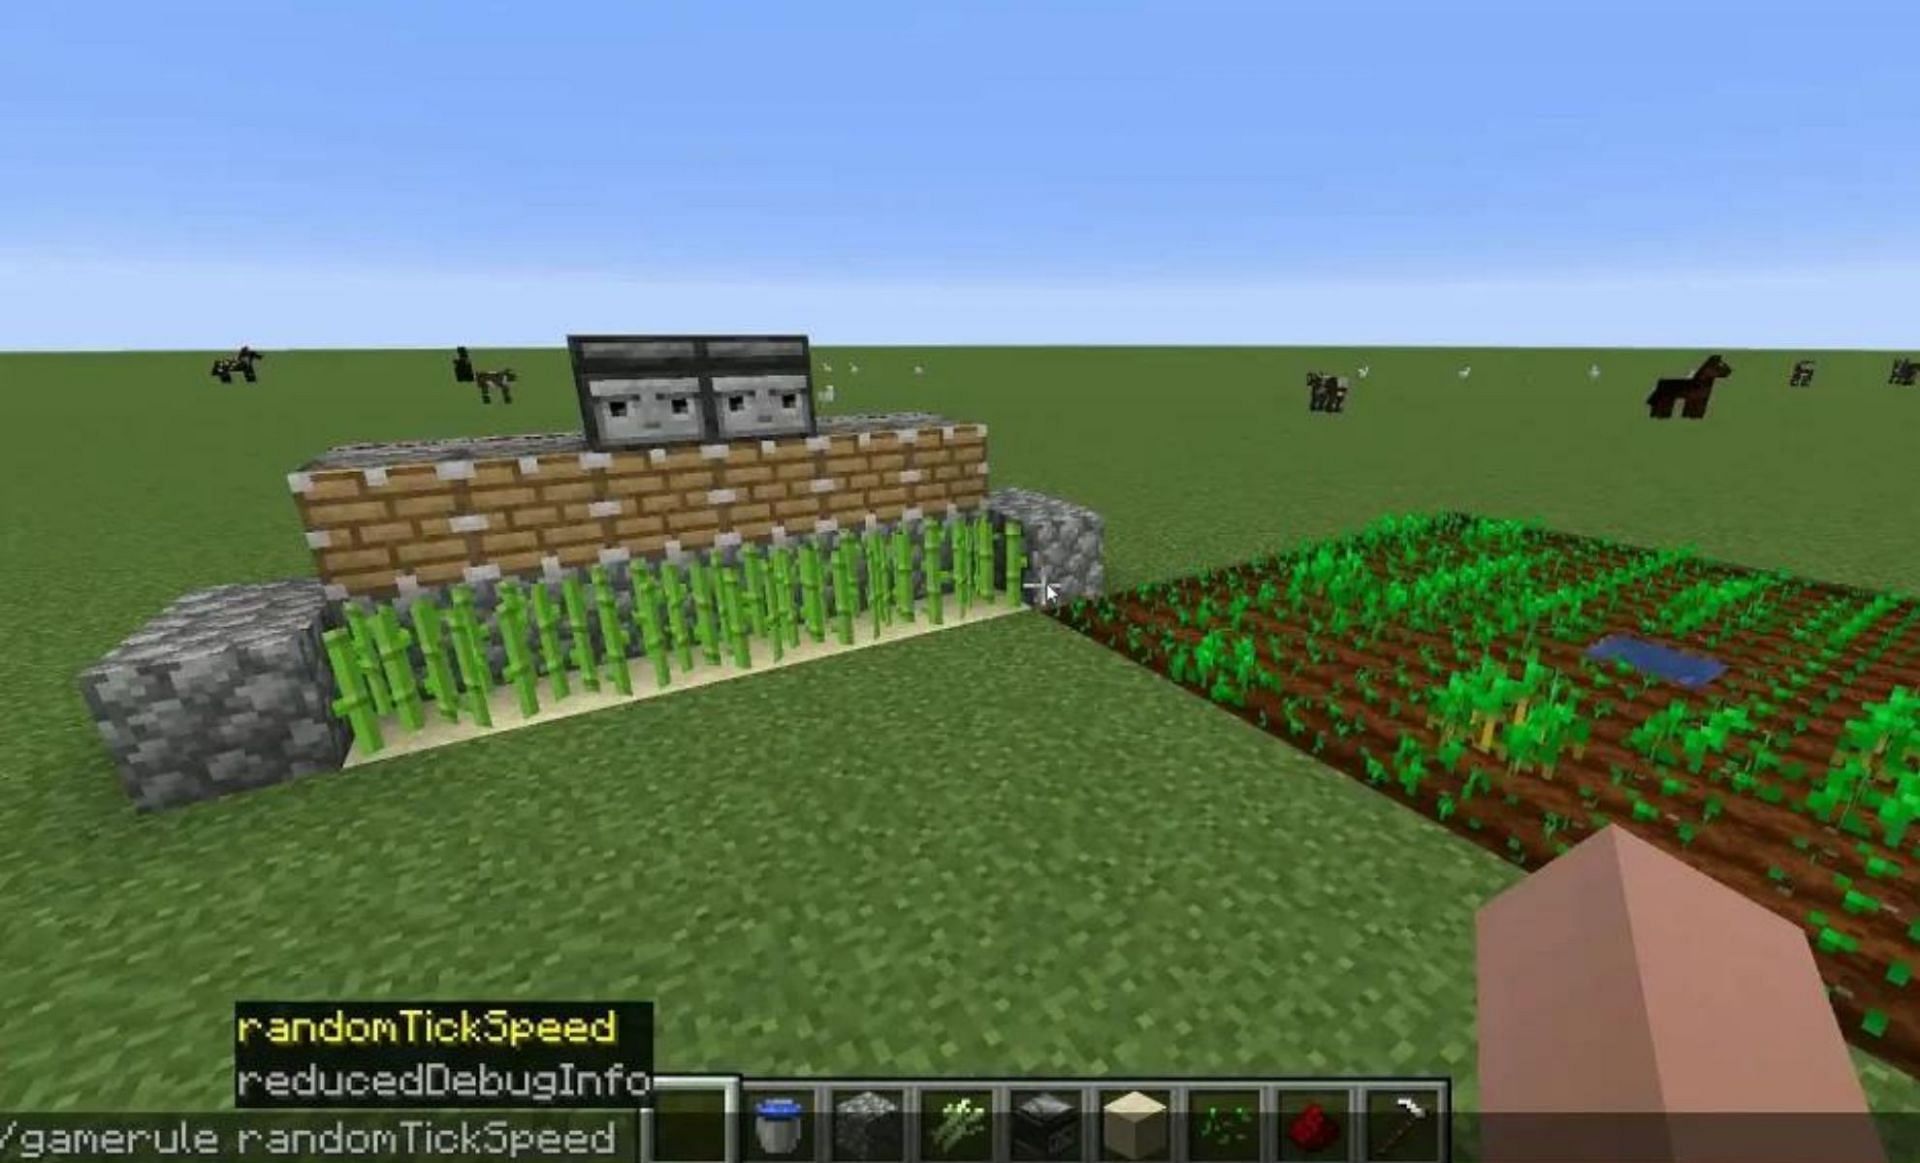 Tick speed can change a lot of things in a game world of a server (Image via Game Specifics)